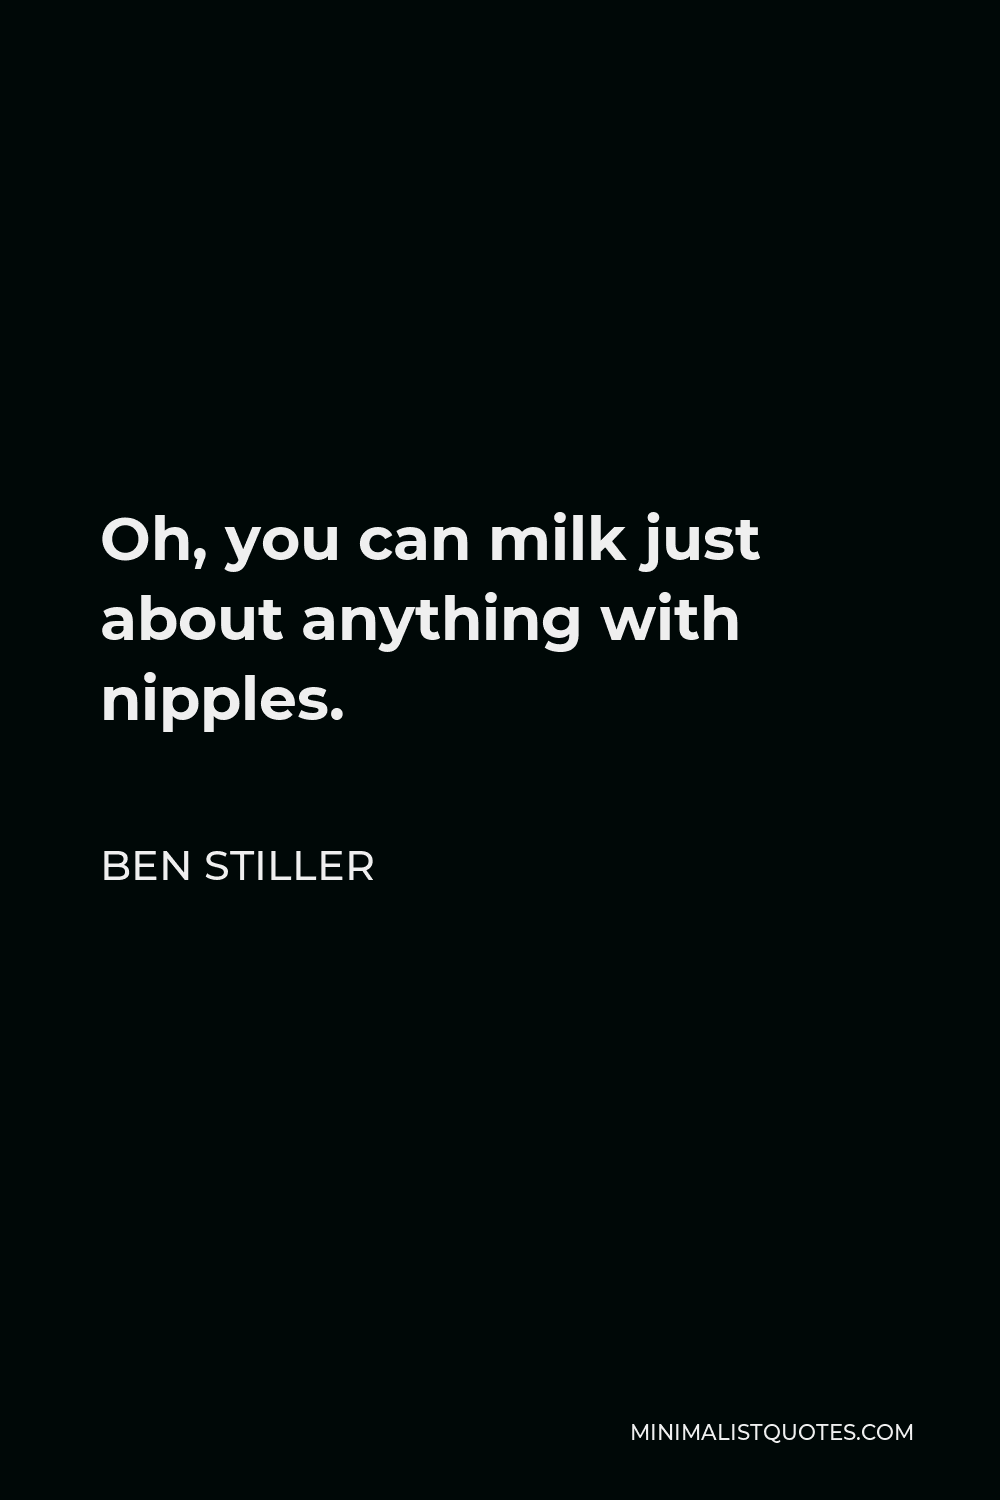 Ben Stiller Quote - Oh, you can milk just about anything with nipples.